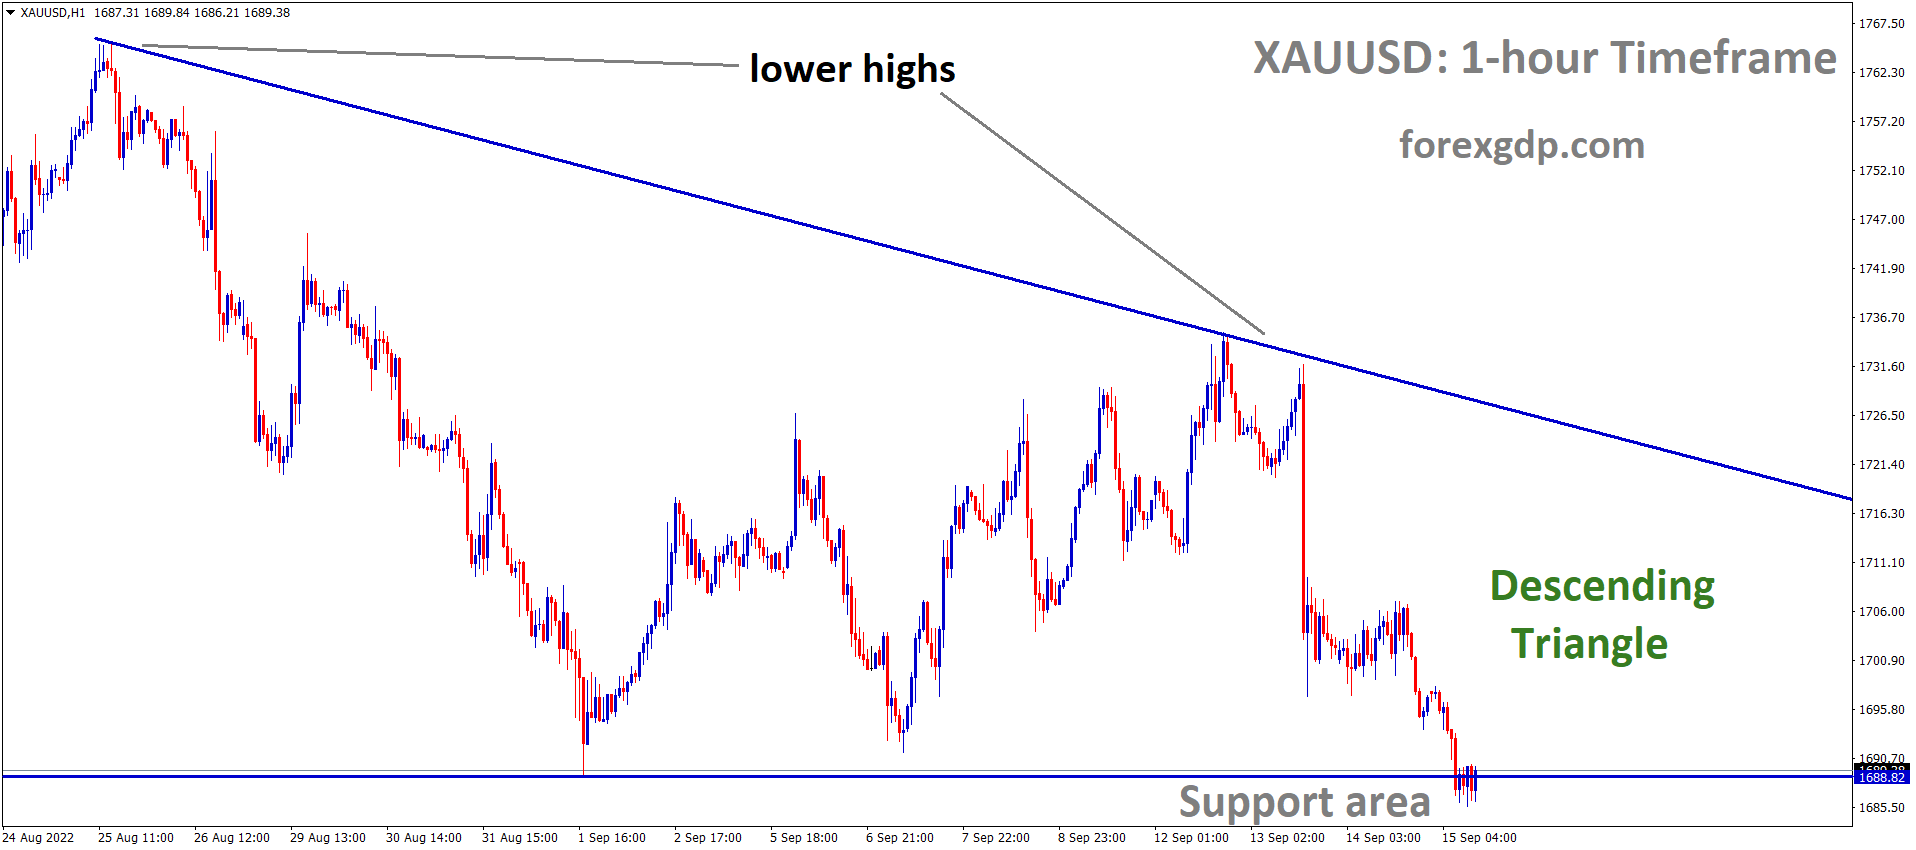 XAUUSD Gold price is moving in the Descending triangle pattern and the market has reached the horizontal support area of the pattern